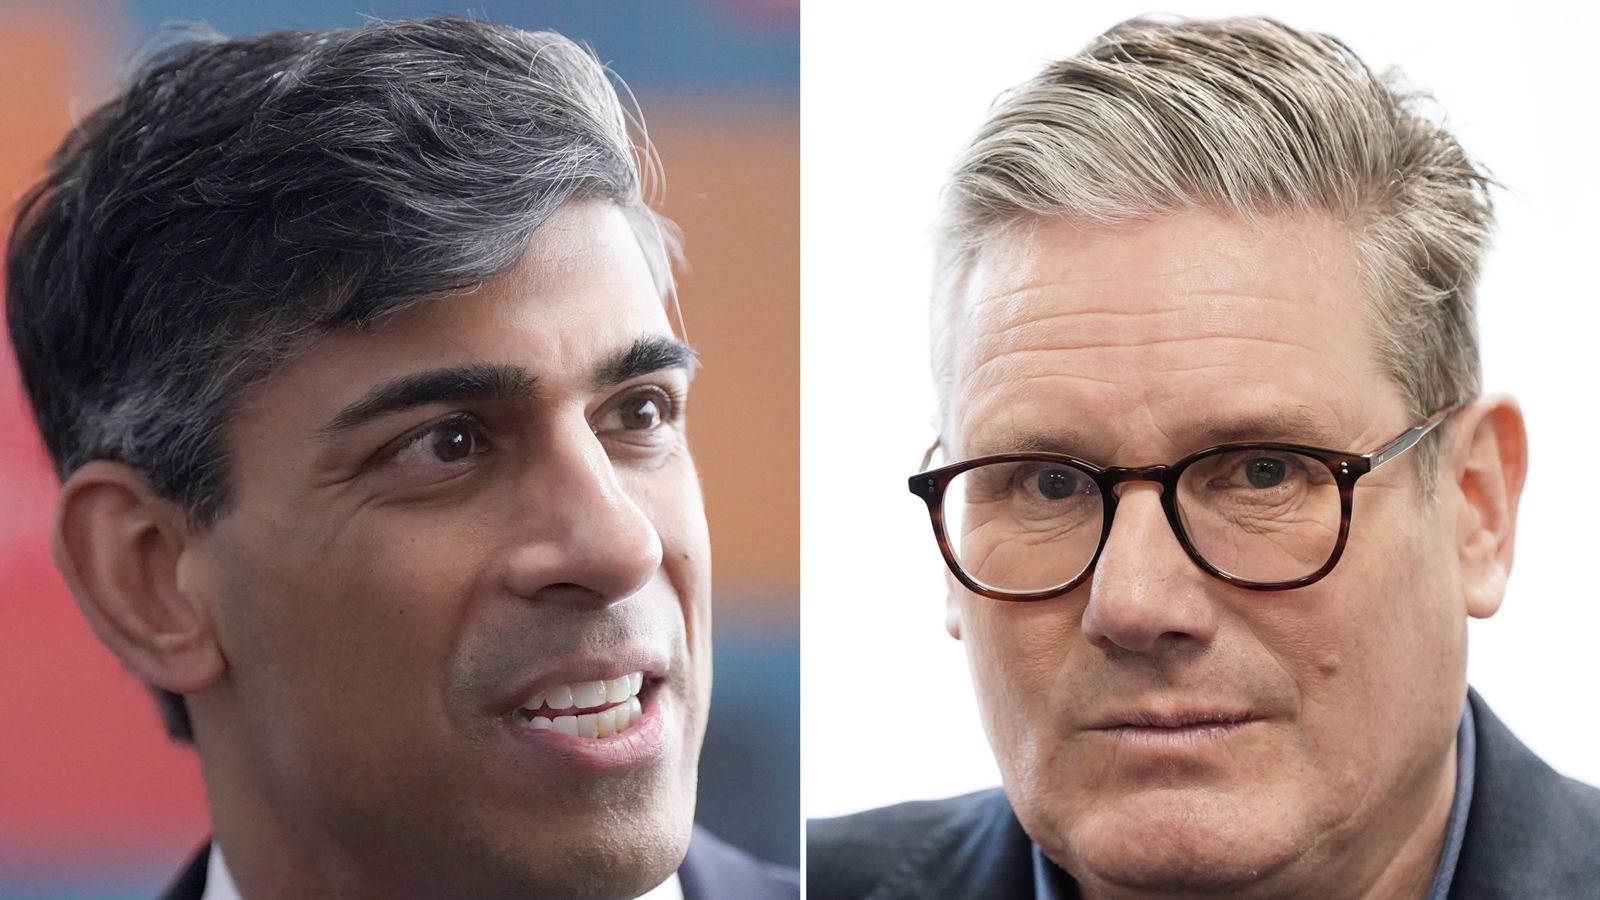 Rishi Sunak and Sir Keir Starmer both praise Christians in Easter messages - but Labour leader takes chance to talk of 'new beginnings'